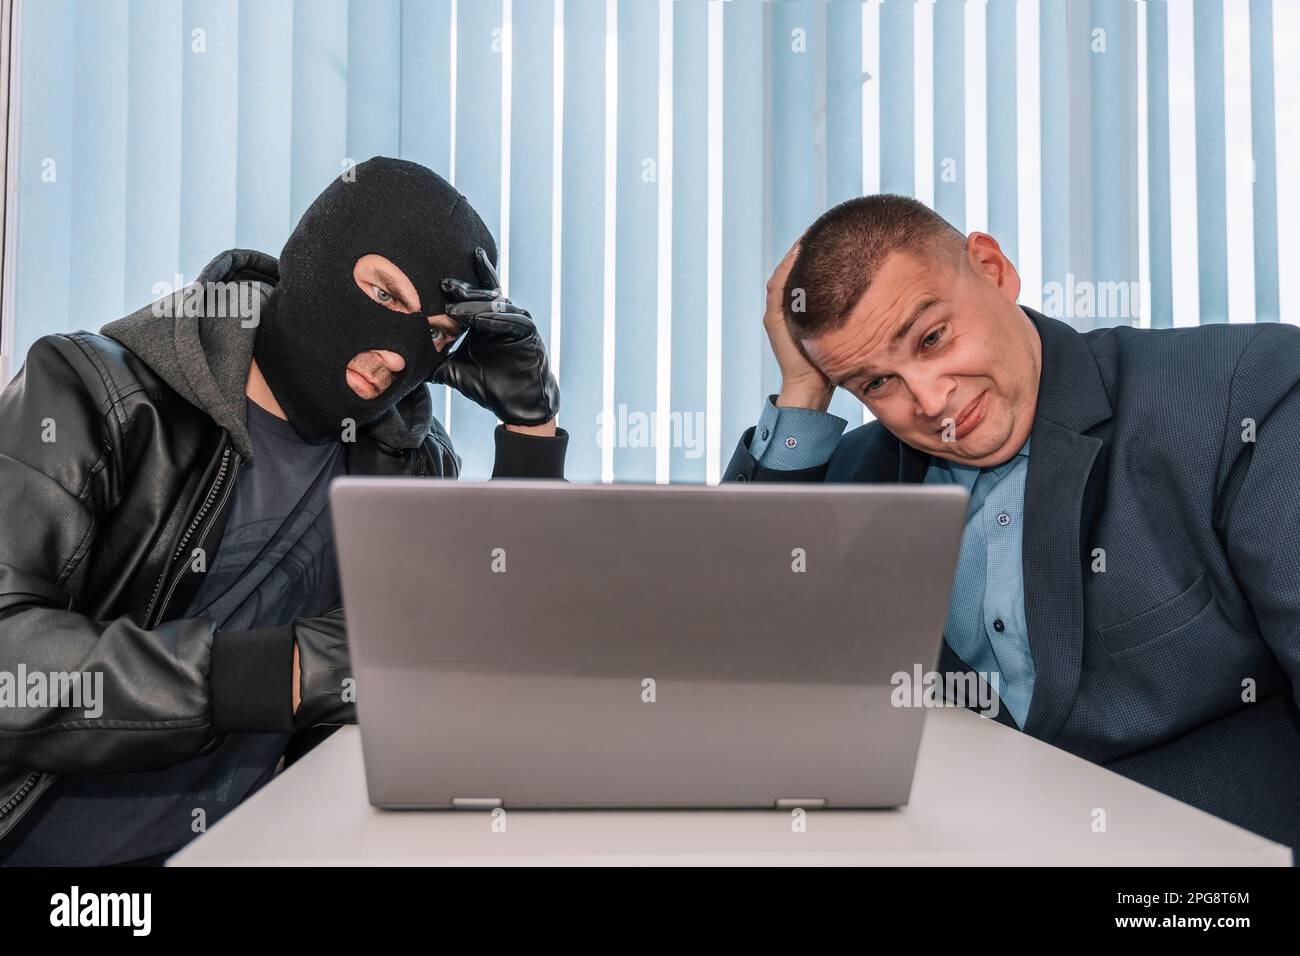 The extortionist thief demands money in the businessman's office. Theft of personal data. Bank robbery. the concept of extortion and robbery. Stock Photo